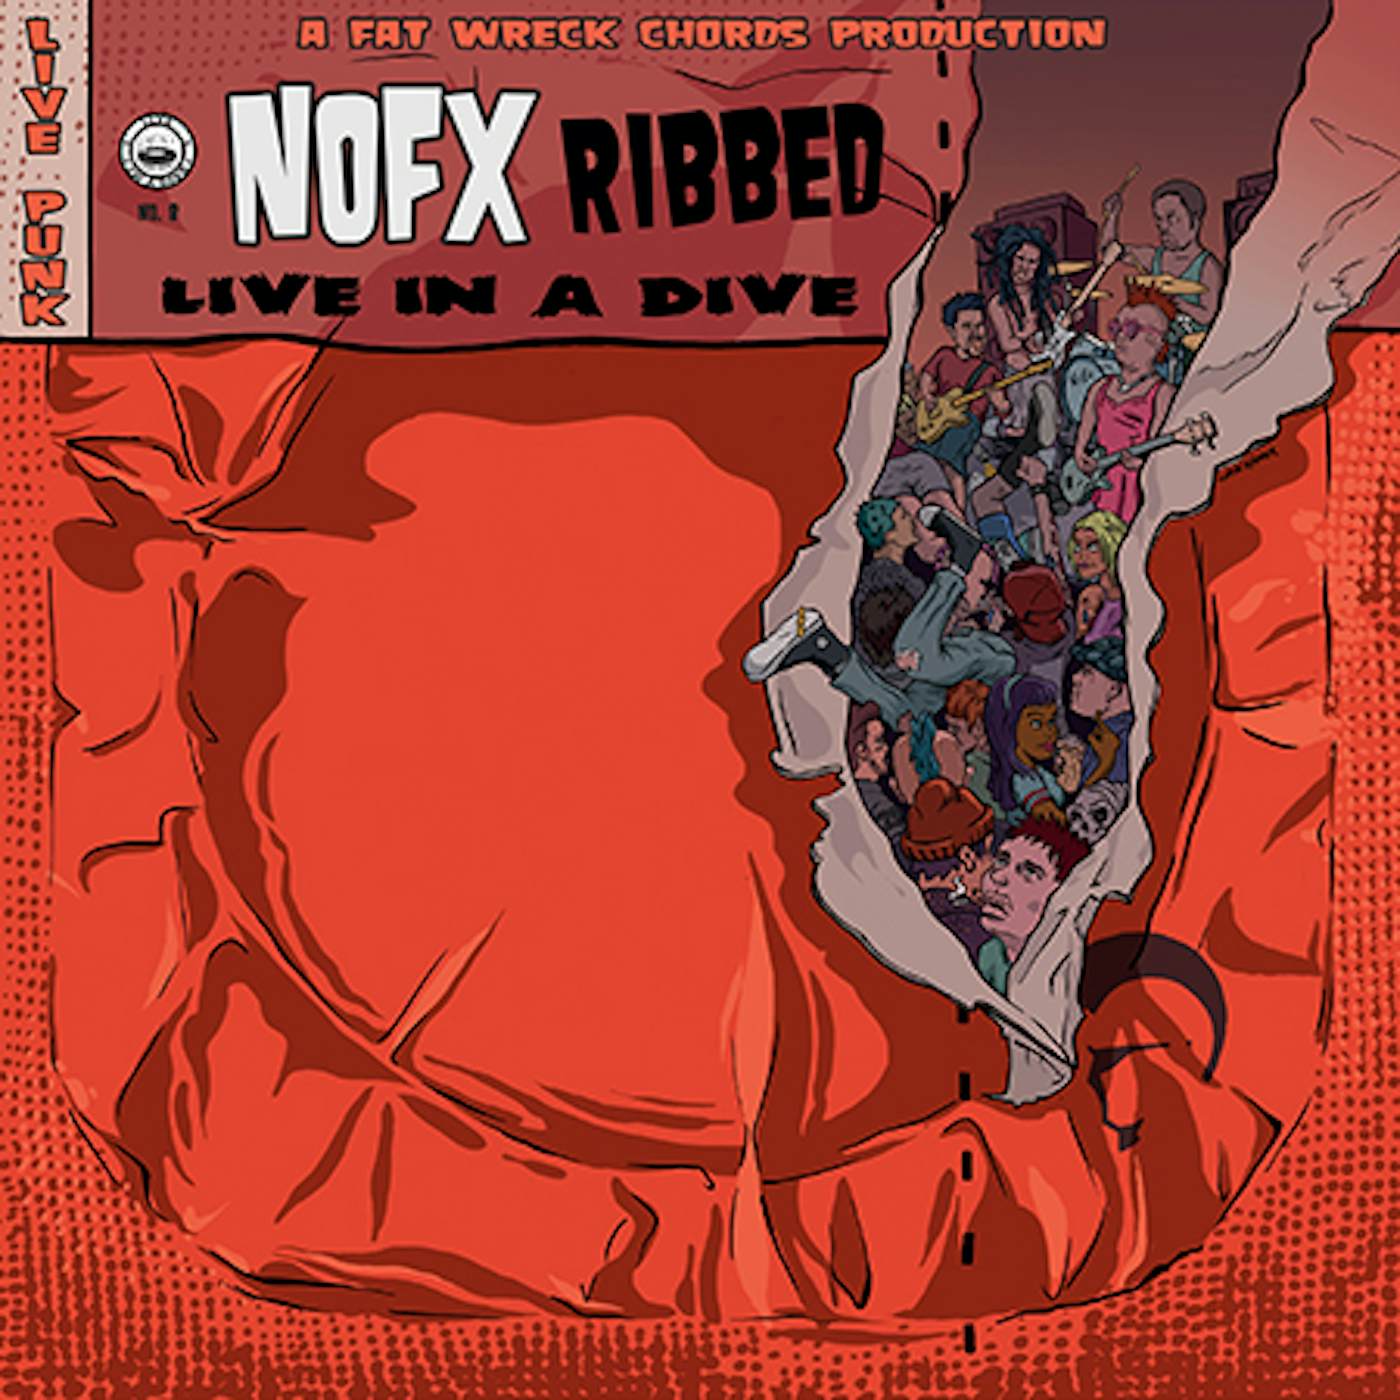 NOFX RIBBED- LIVE IN A DIVE CD